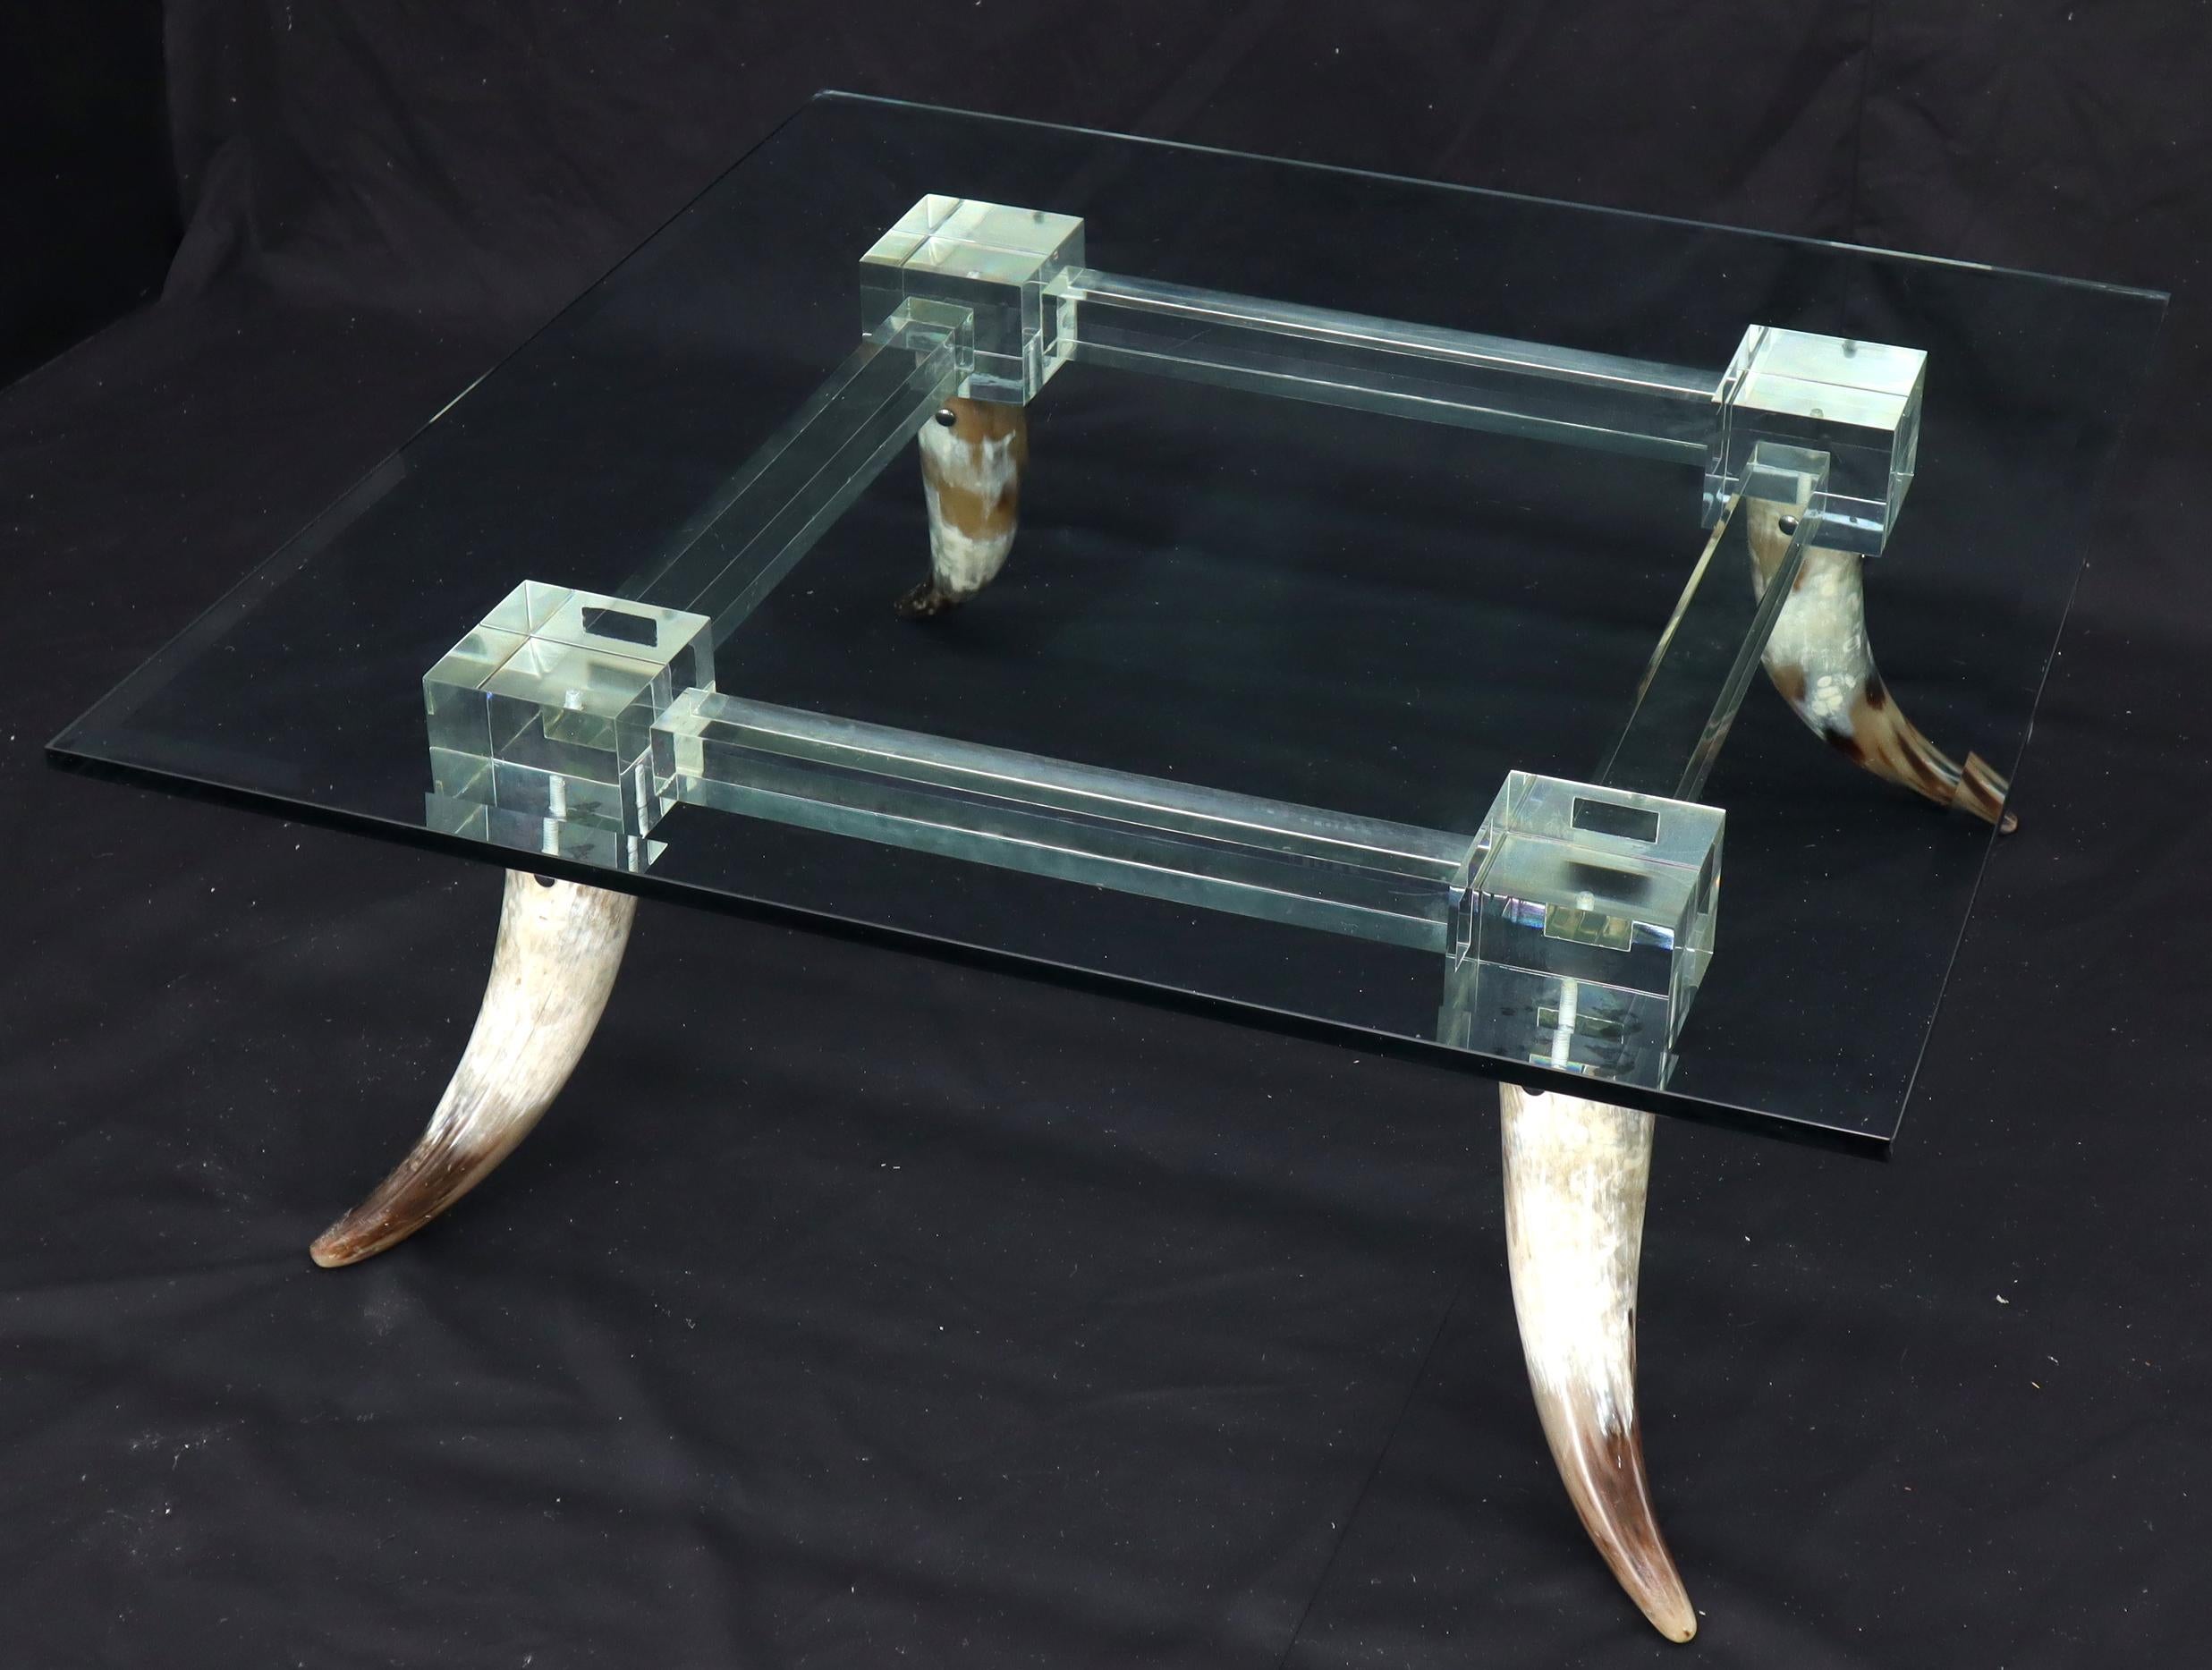 Bull Horns Shaped to Legs Lucite Stretchers Base Square Glass Top Couchtisch im Zustand „Gut“ im Angebot in Rockaway, NJ